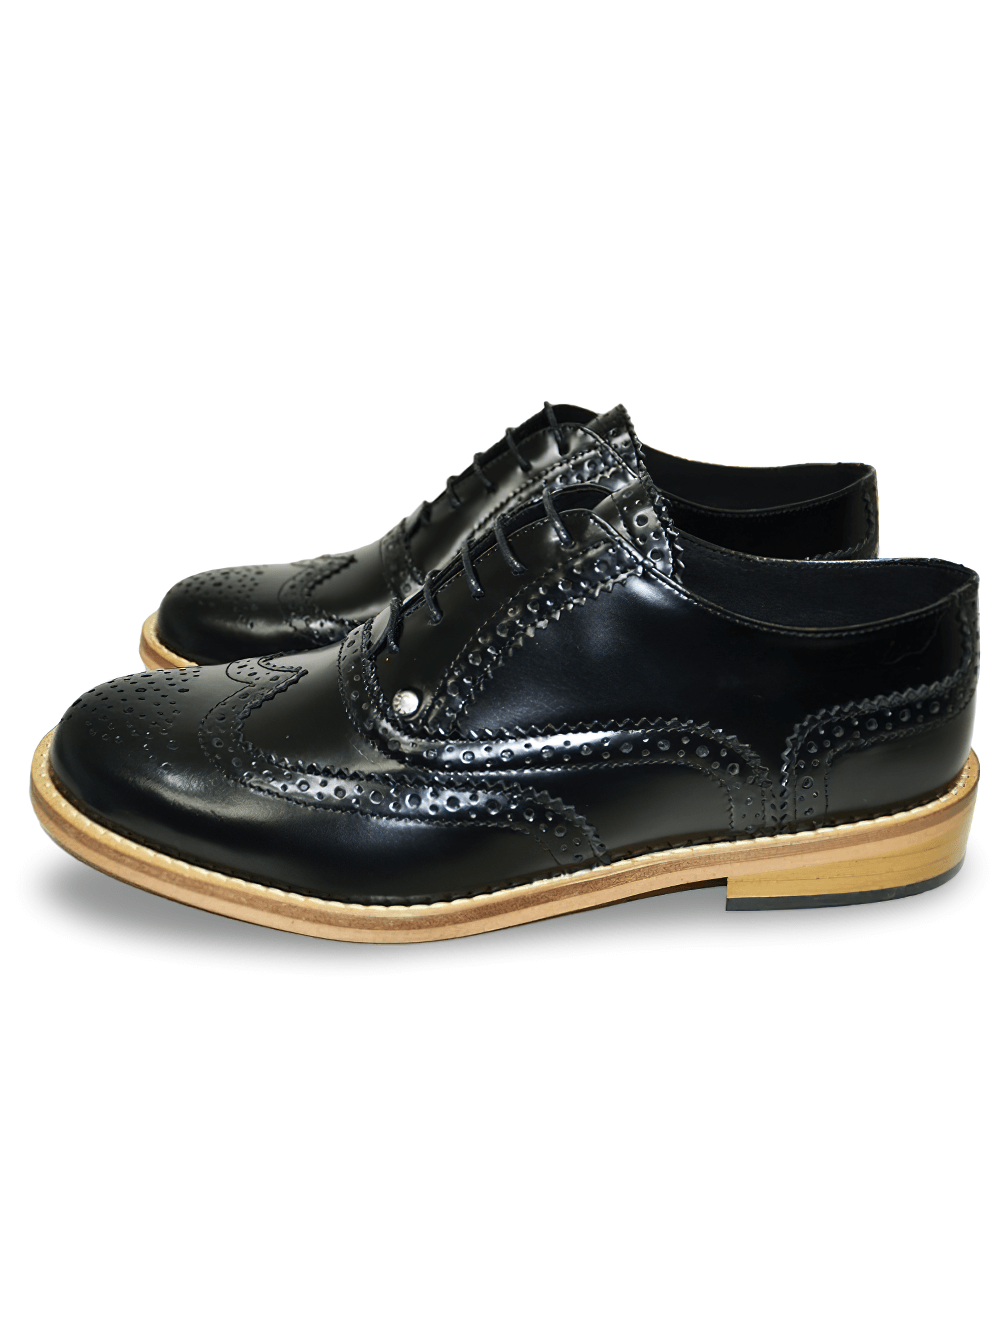 Unisex Black Derby Shoes with Neolite Sole And Lace-up